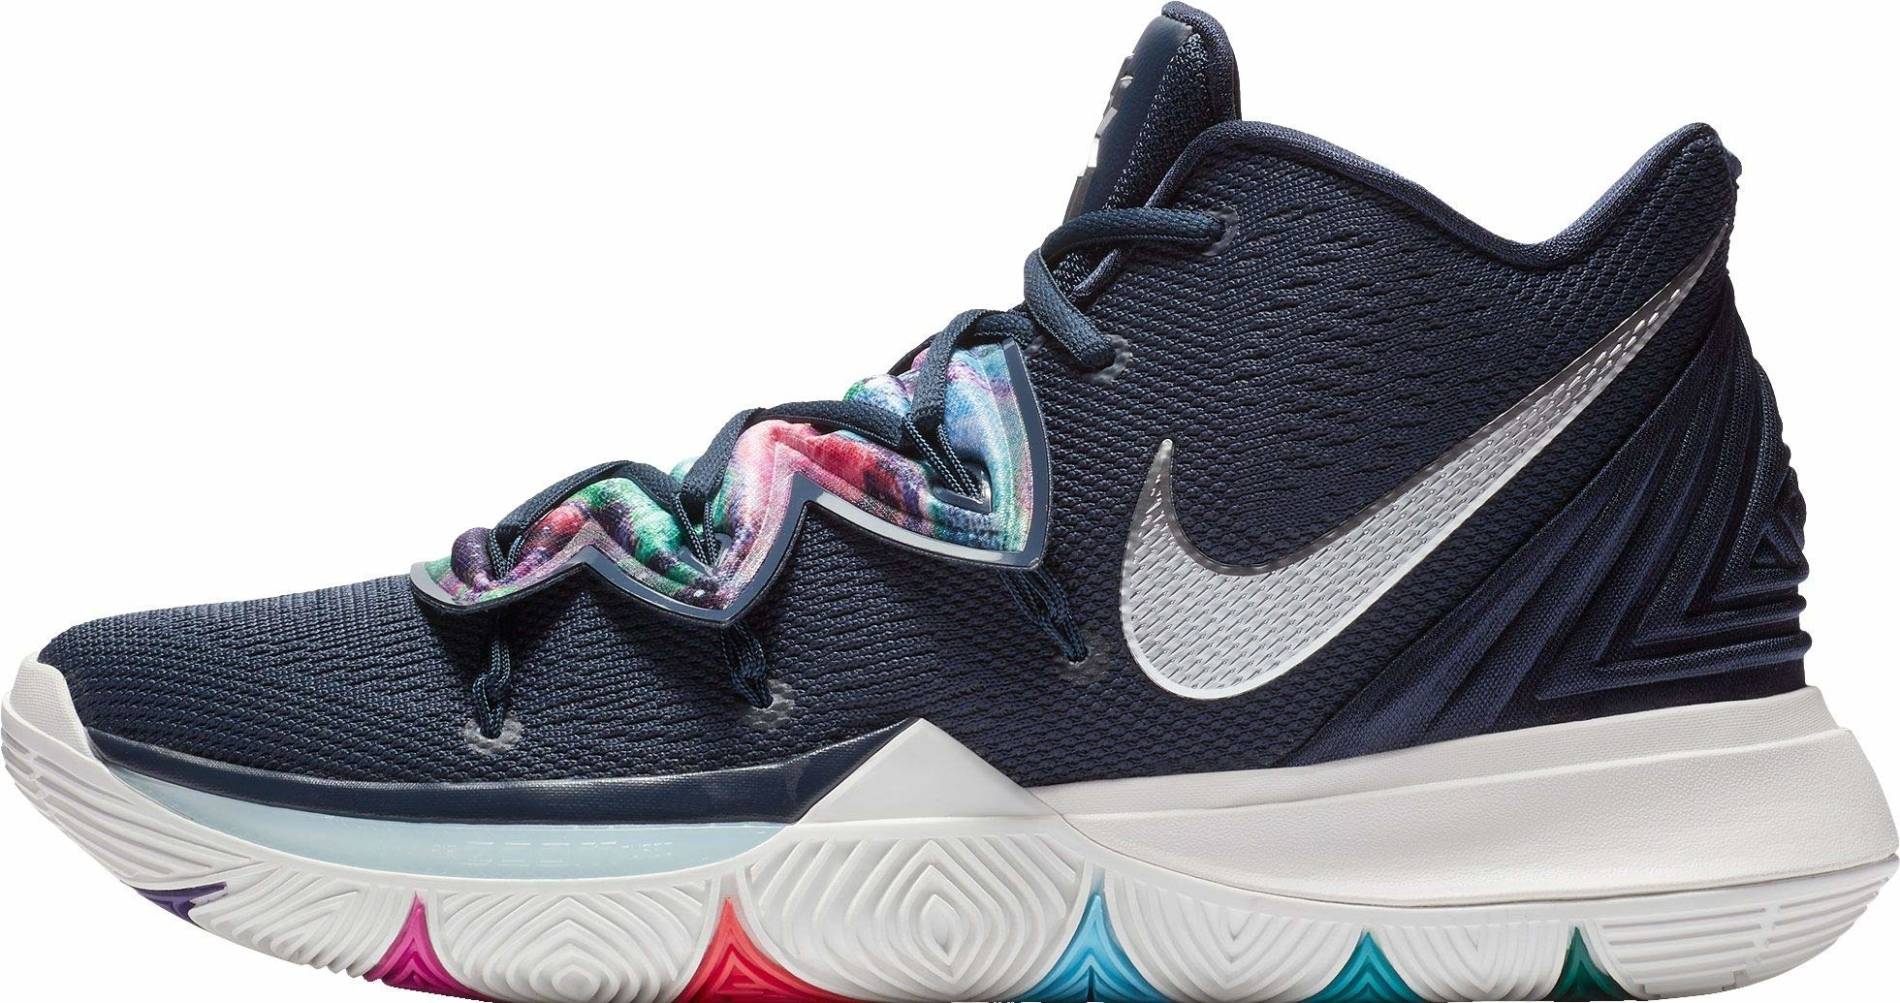 Only $80 + Review of Nike Kyrie 5 